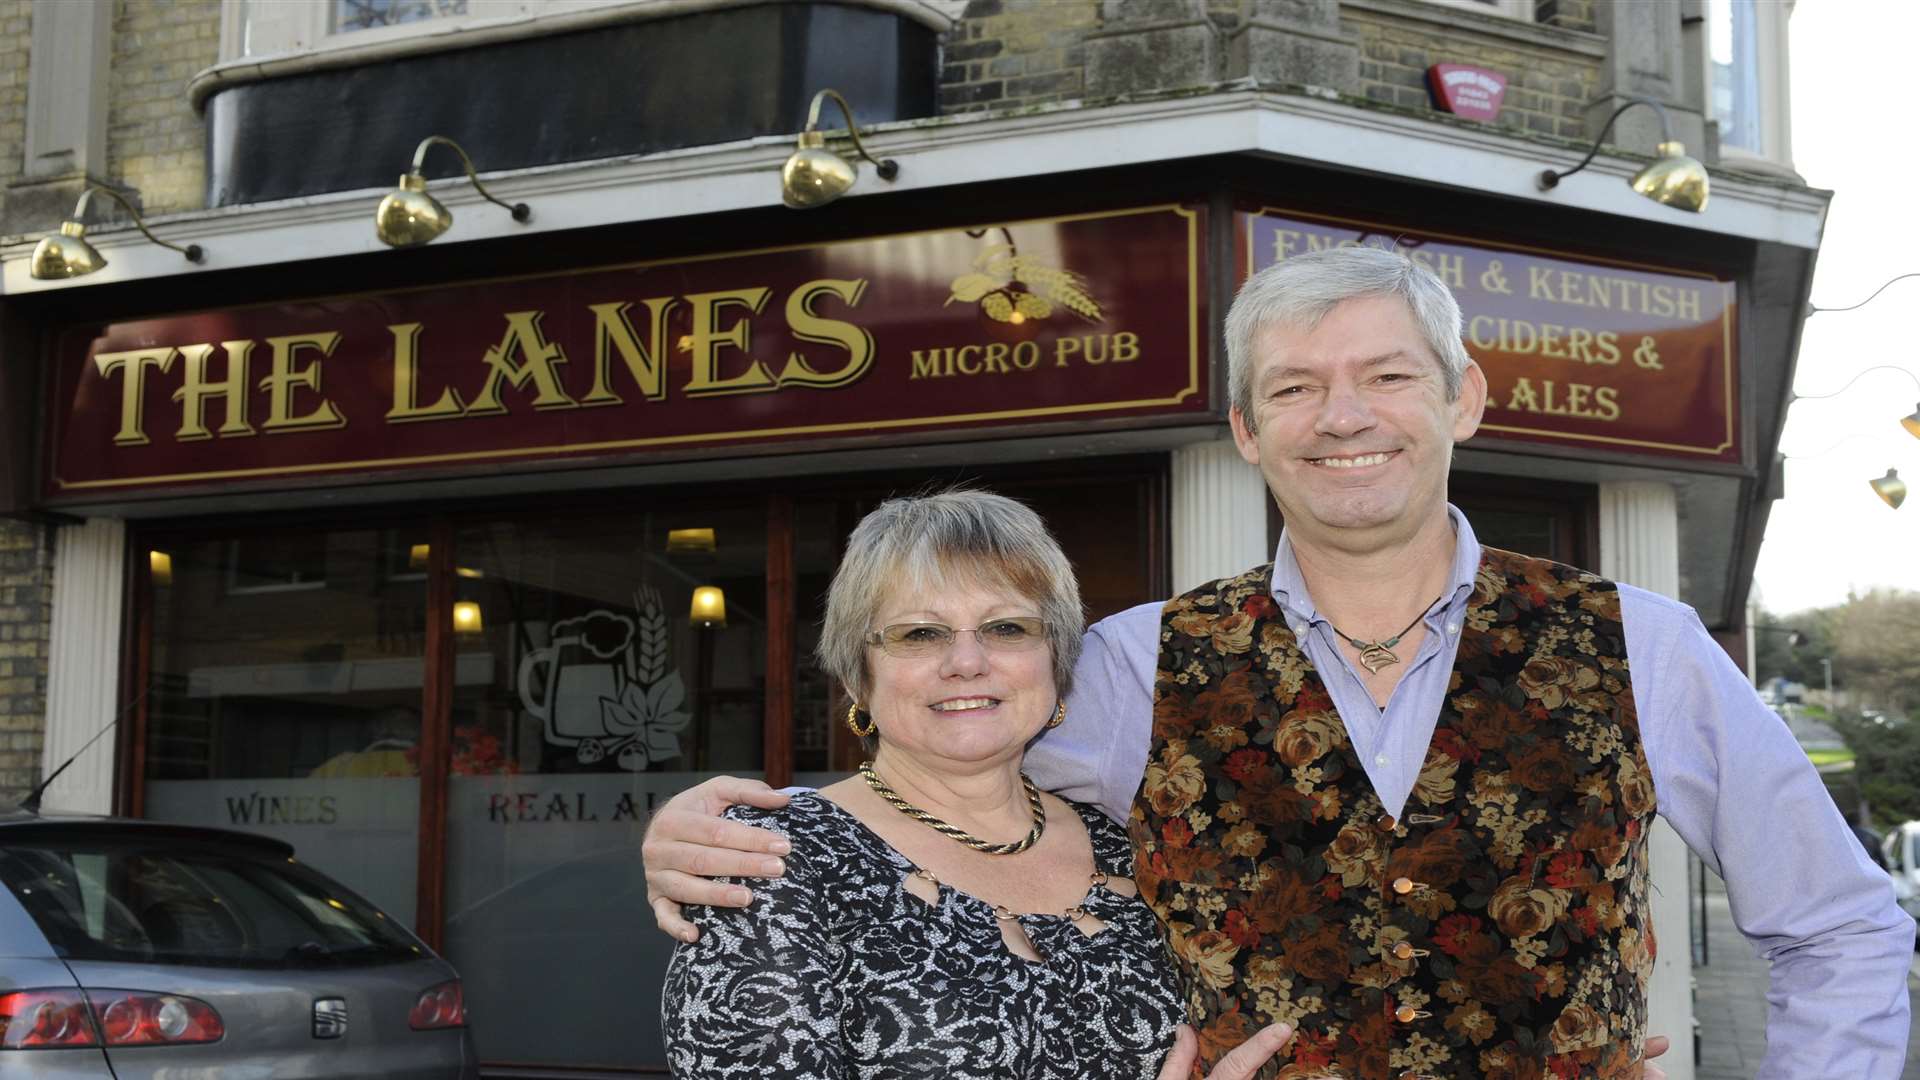 The Lanes micro pub in Dover at the time of its opening in 2014. Pictured are managers Debbie and Keith Lane.